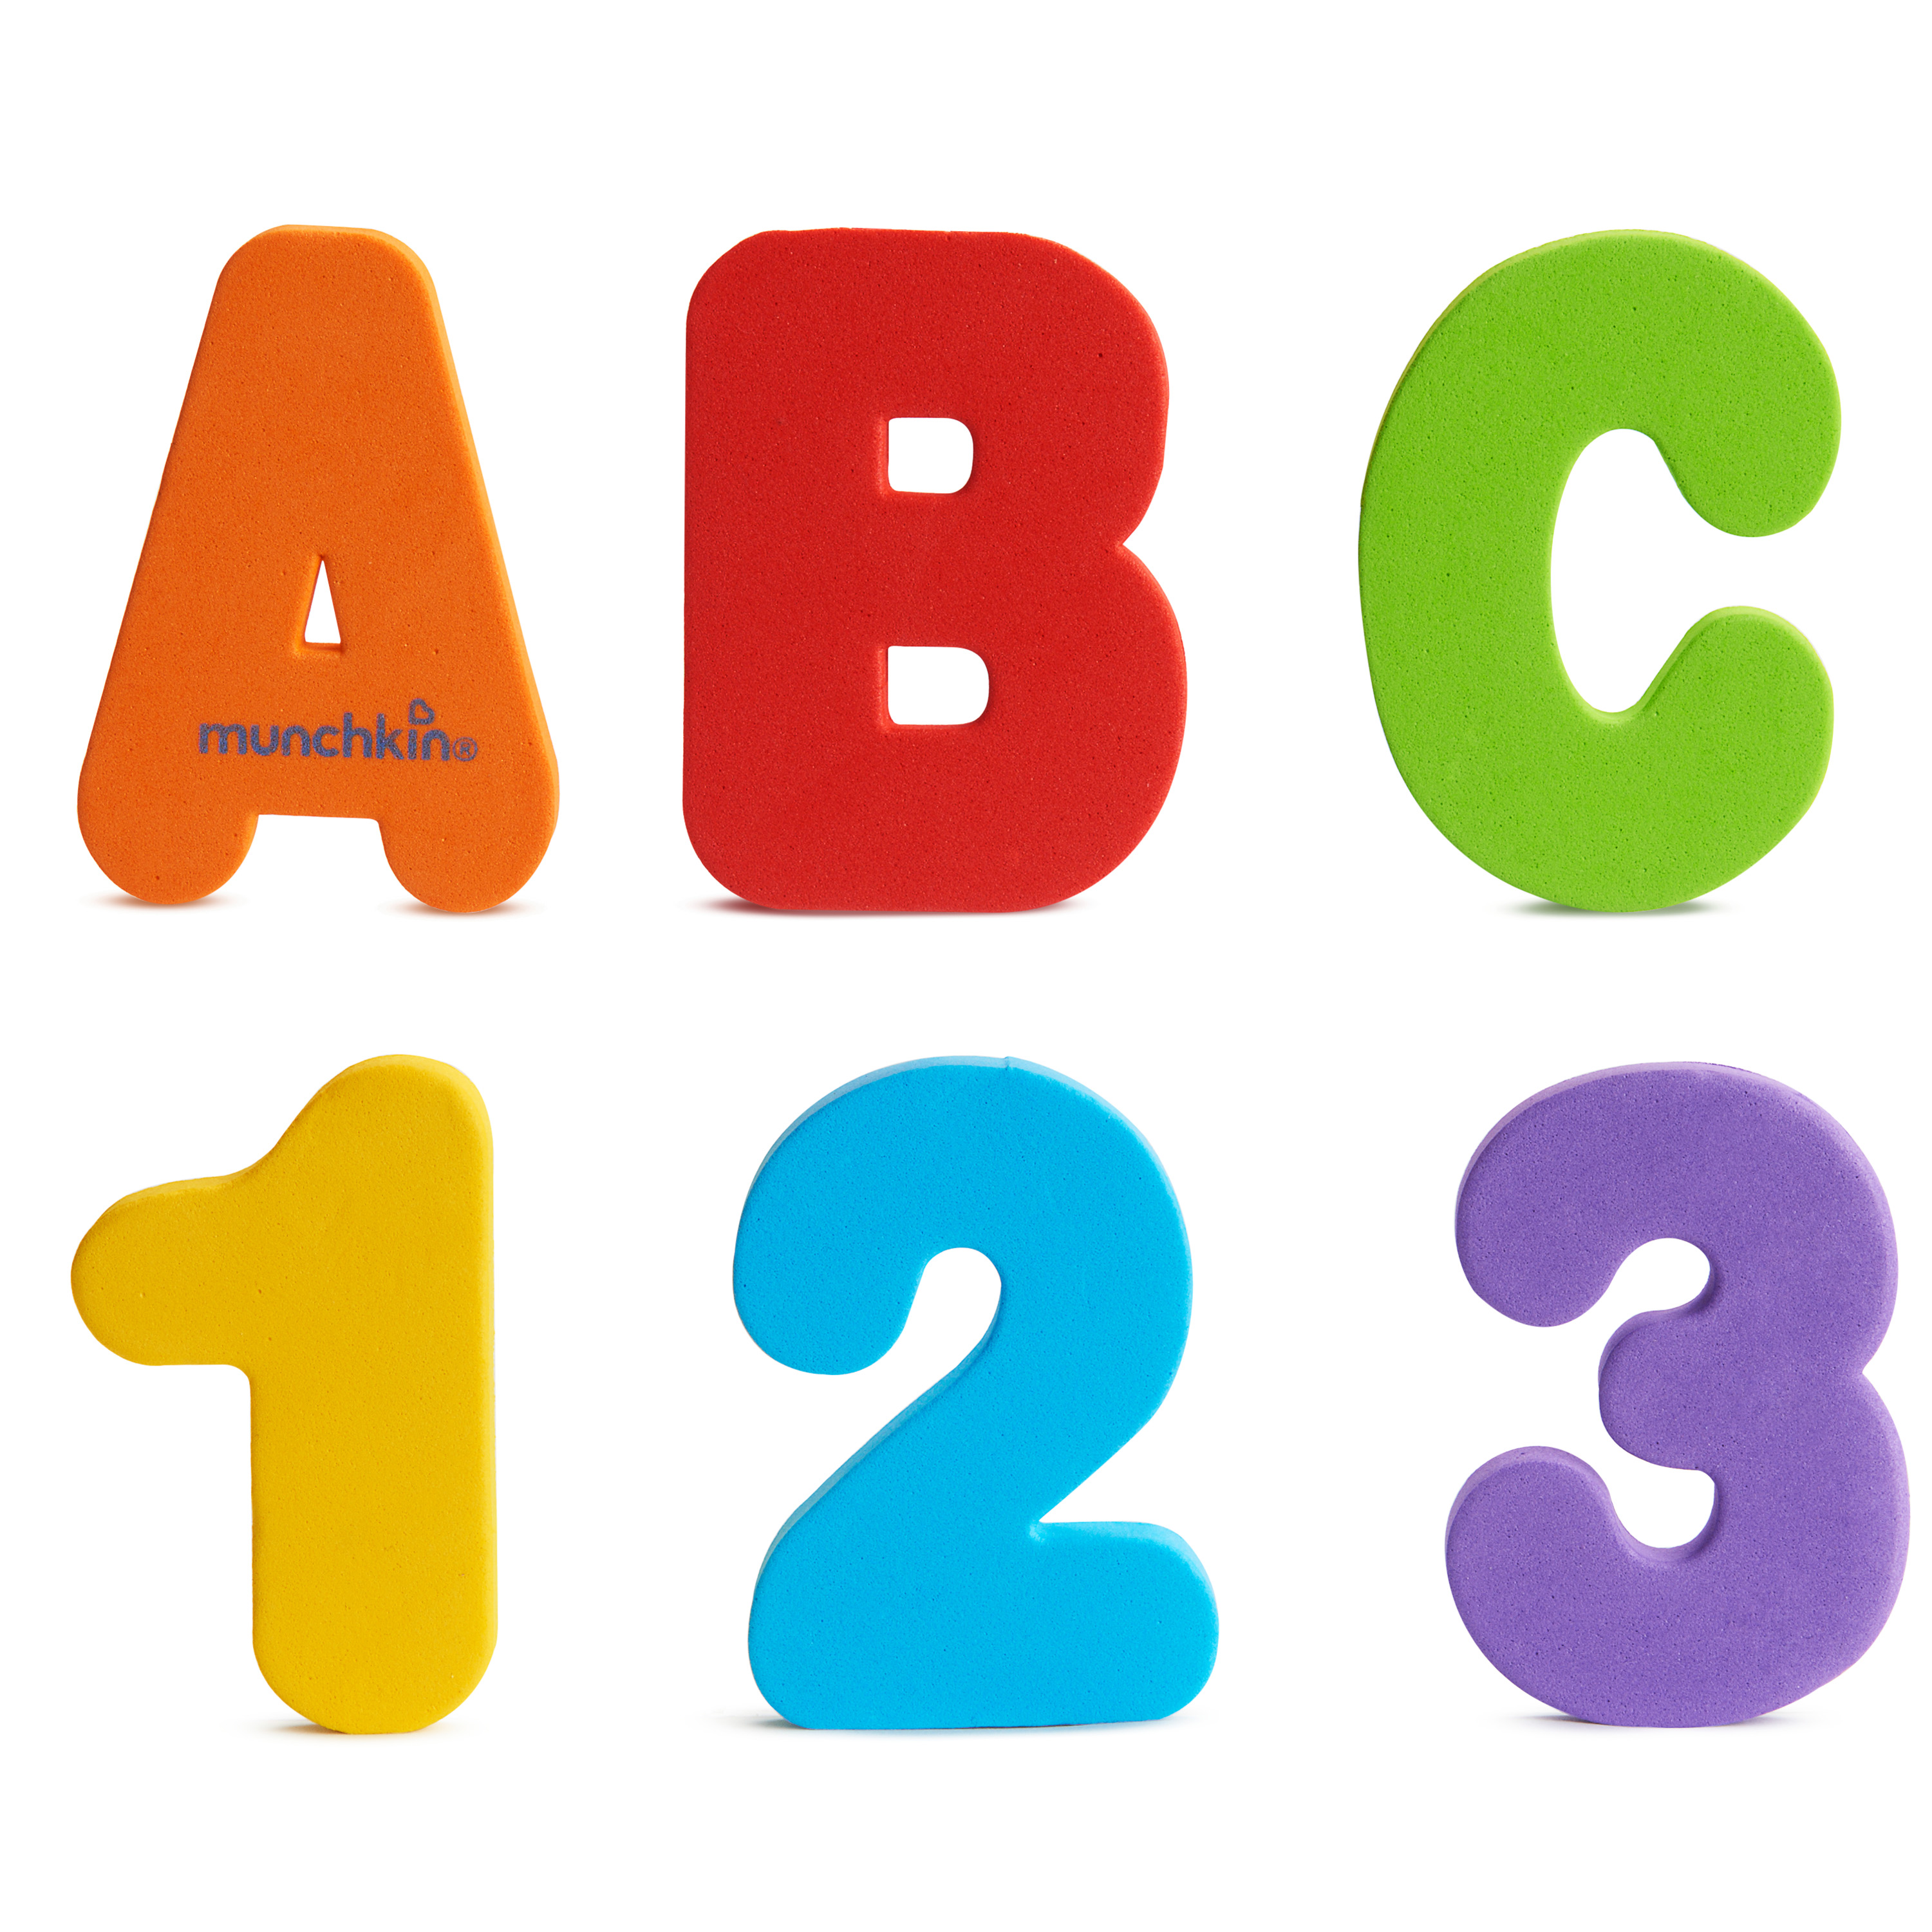 Munchkin Letters and Numbers Bath Toy, Non-Toxic, Multi-Color, 36 Count - image 1 of 8